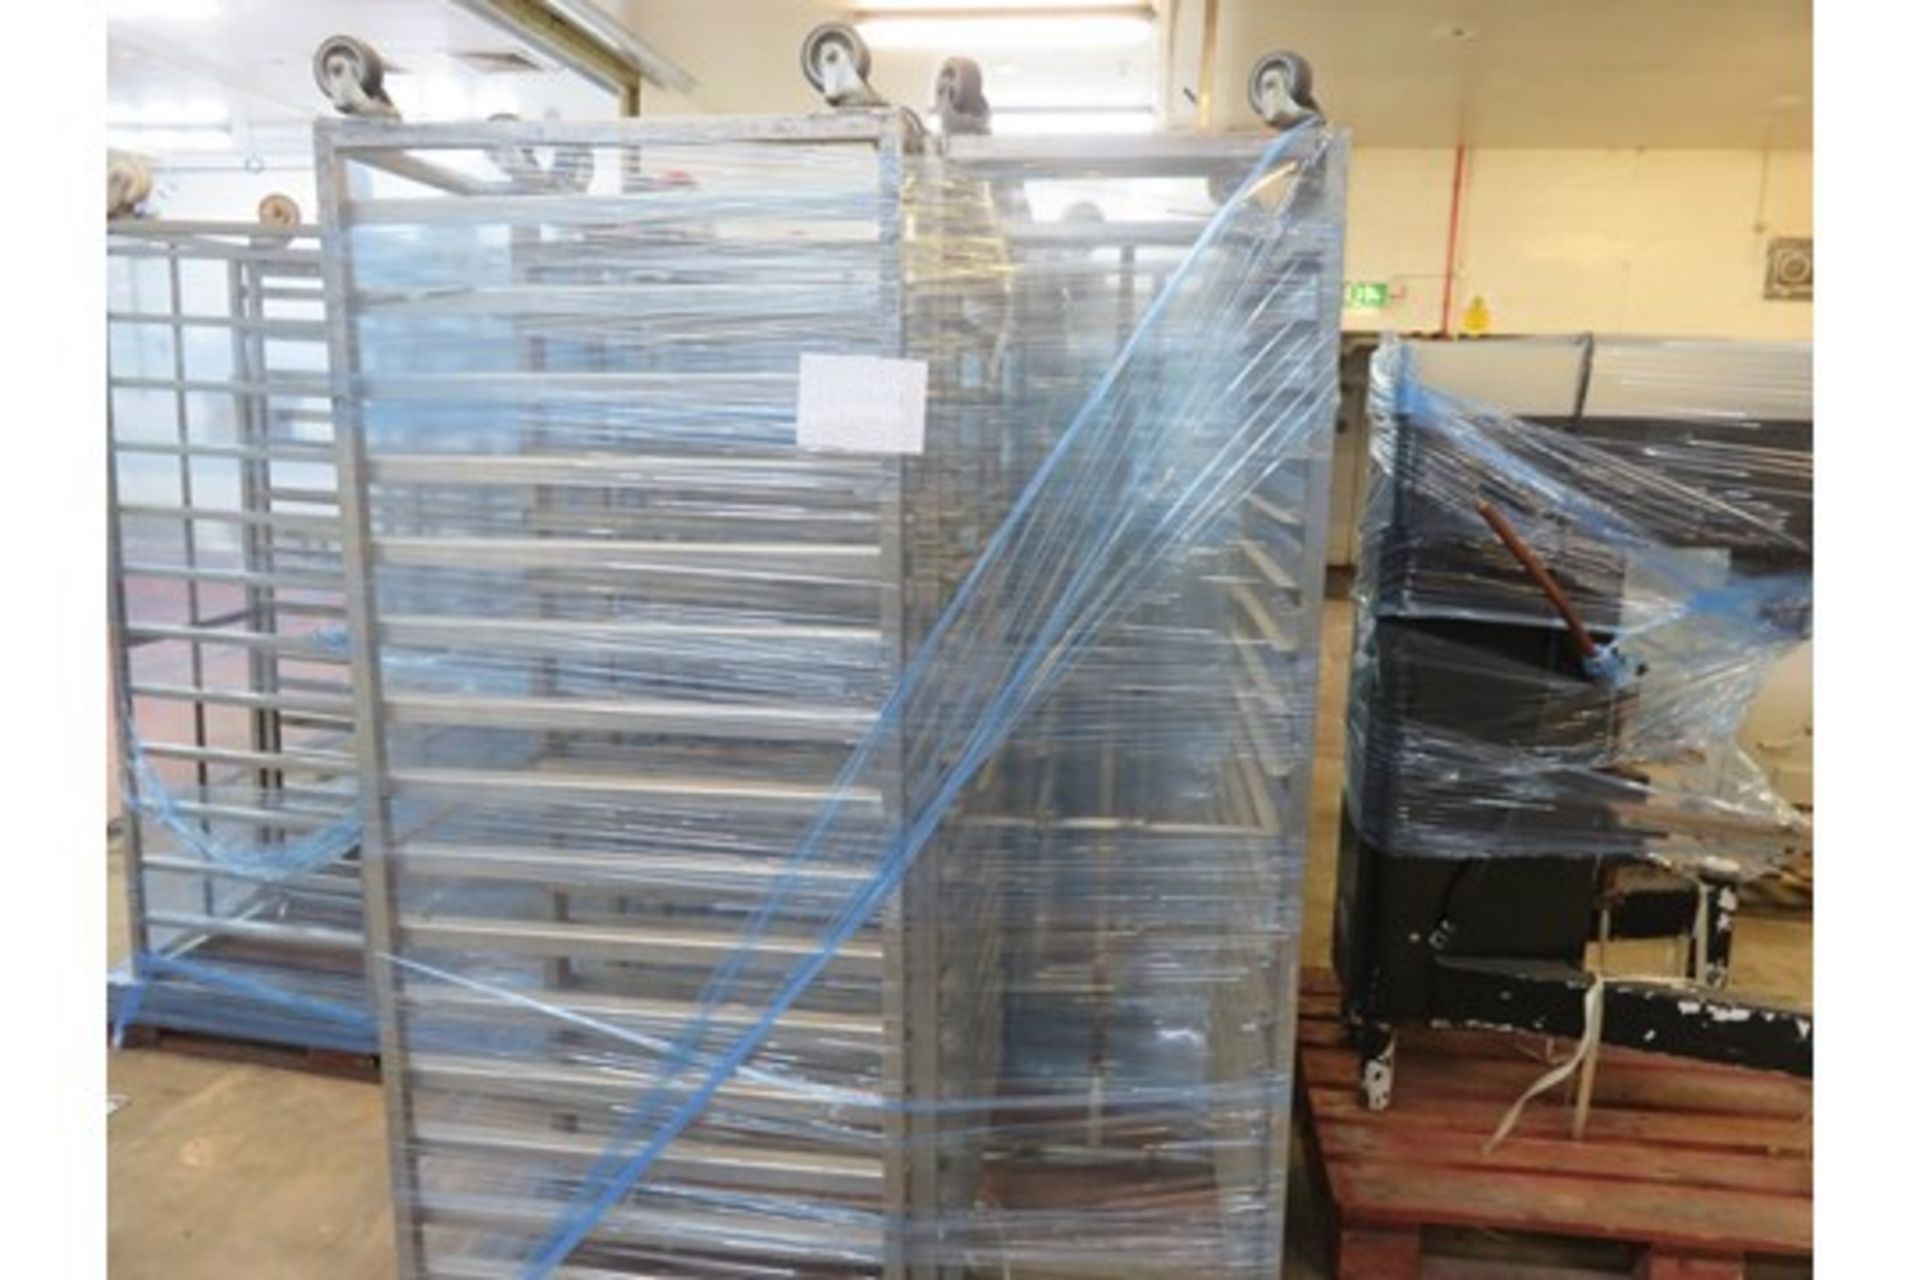 3 x Mobile S/s Racks - 2 x Capable of holding 16 trays & 1 x rack holding 20 trays. Lift Out £20